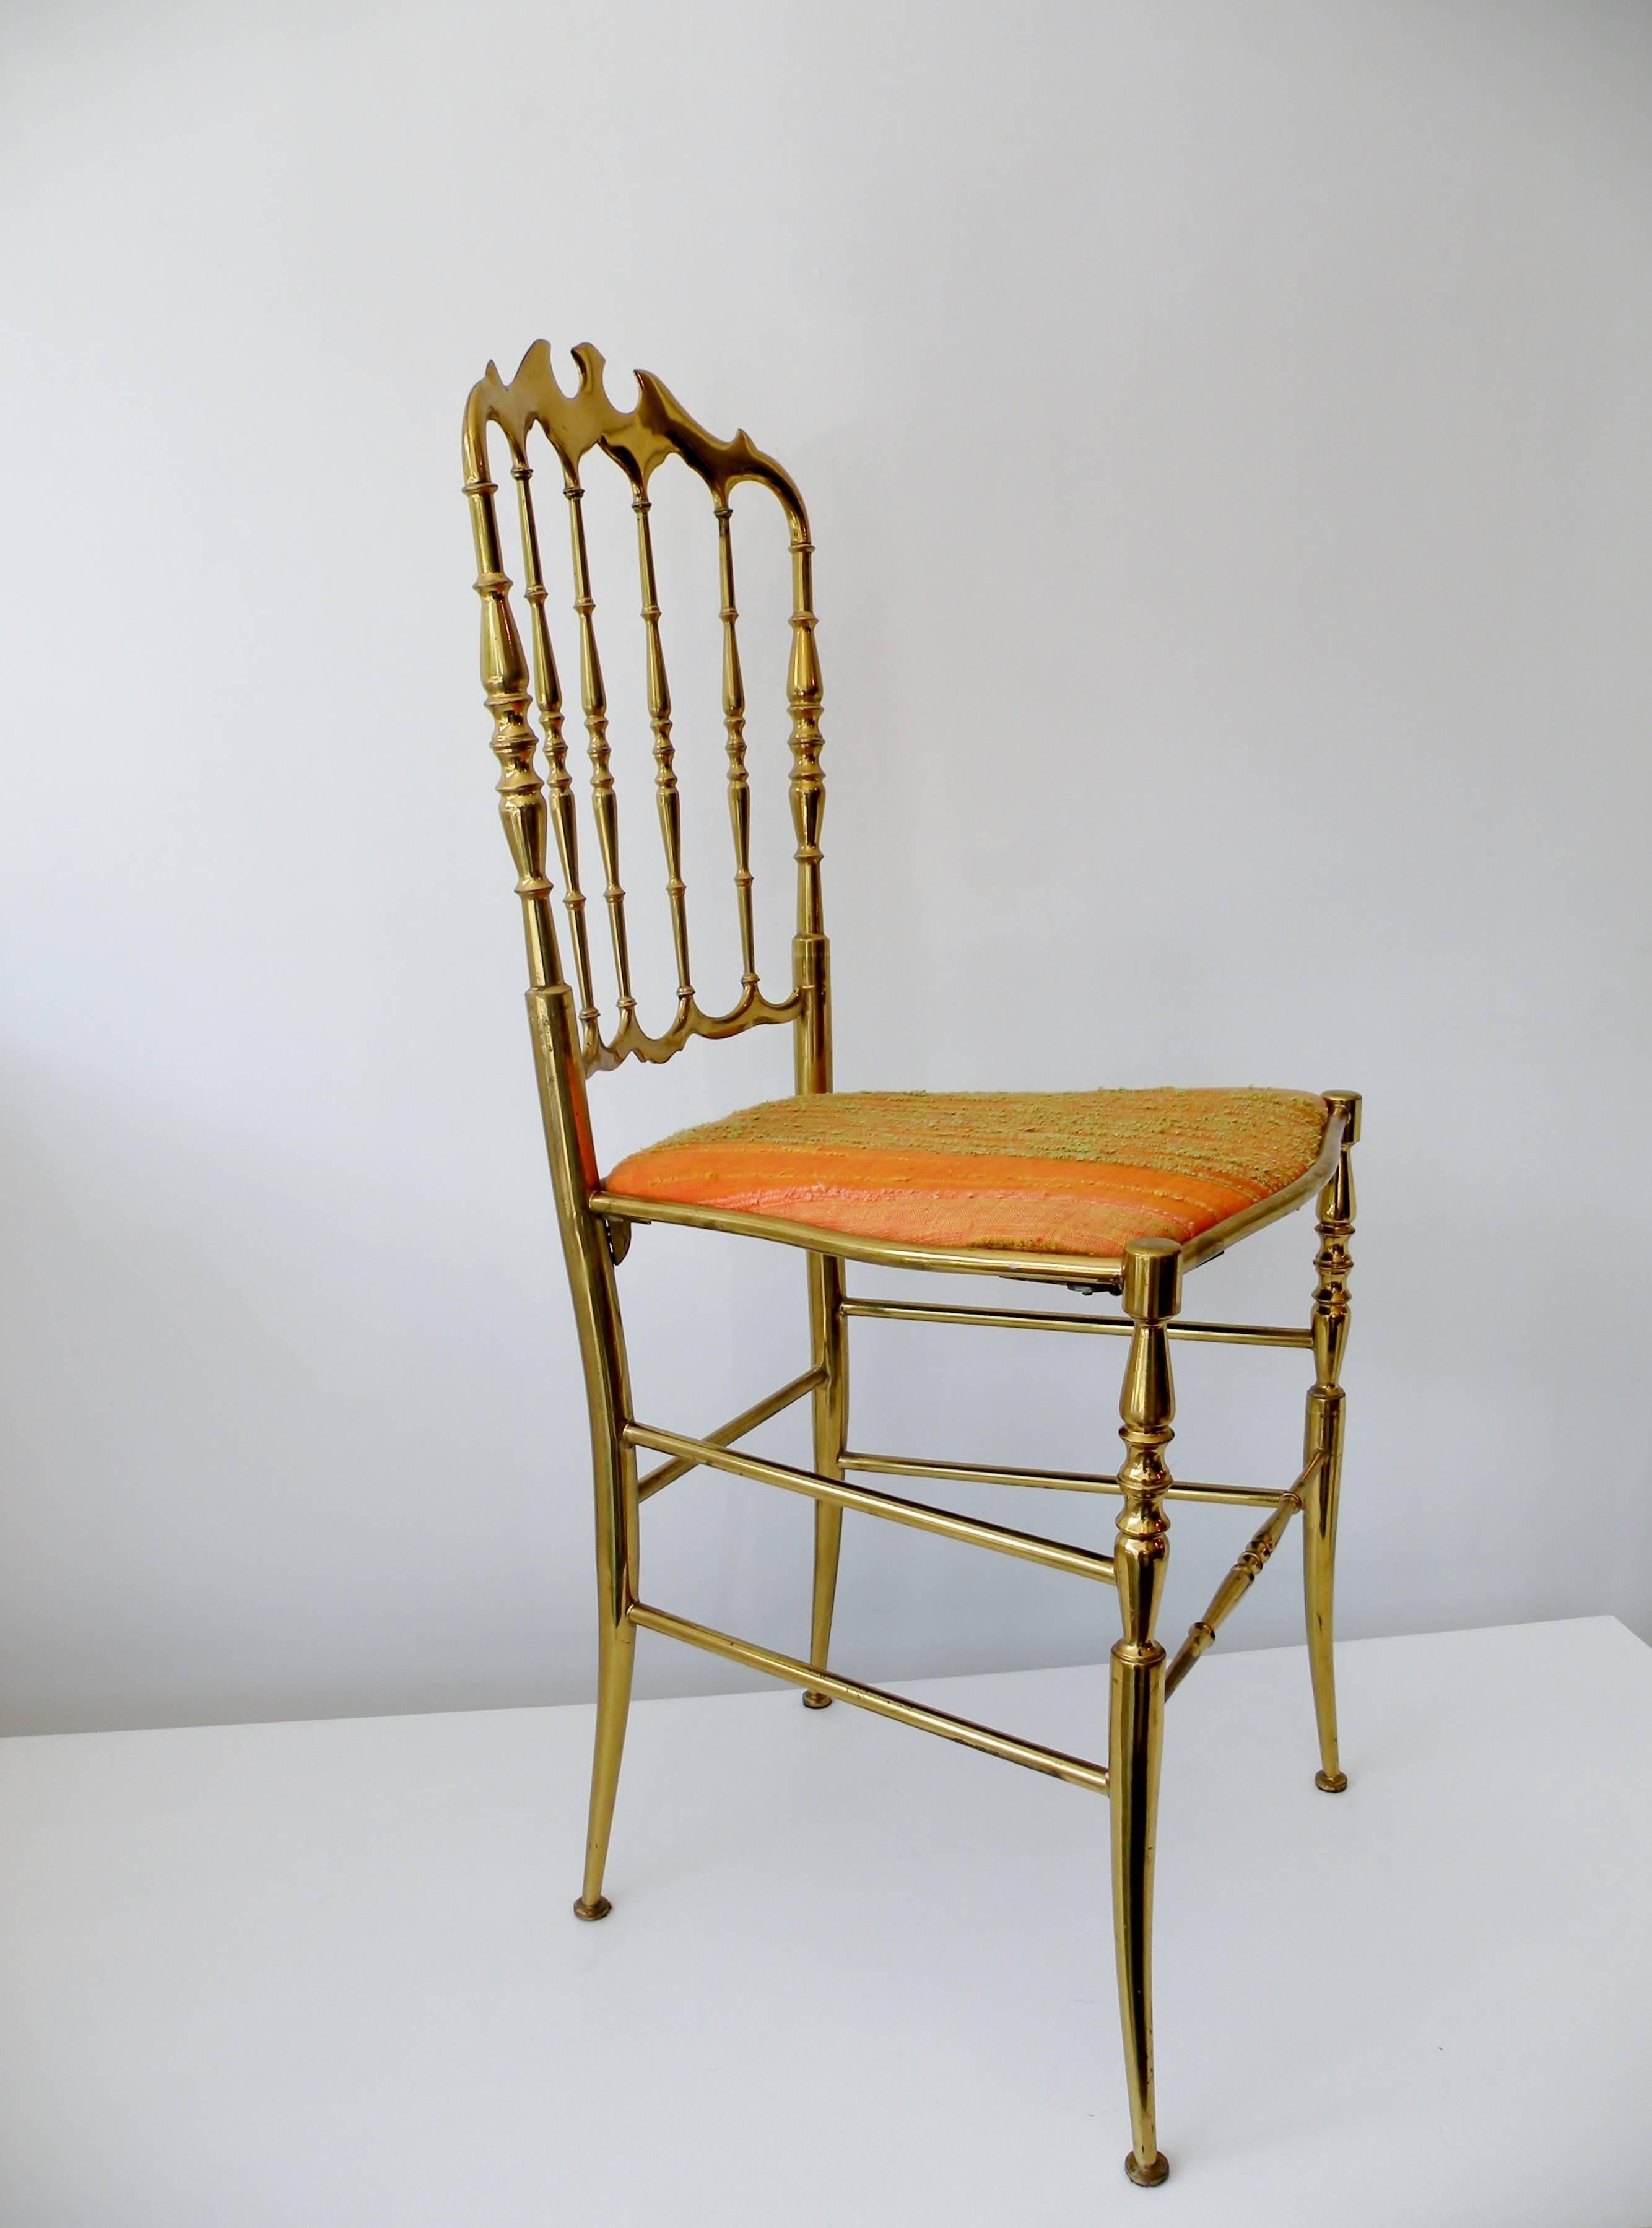 Single 1960s era Italian brass Chiavari side chair. This iconic and elegant design has been a design staple for a century and has today, in its luxurious brass form, become synonymous with Hollywood Regency style. Raw silk upholstered seat in shades